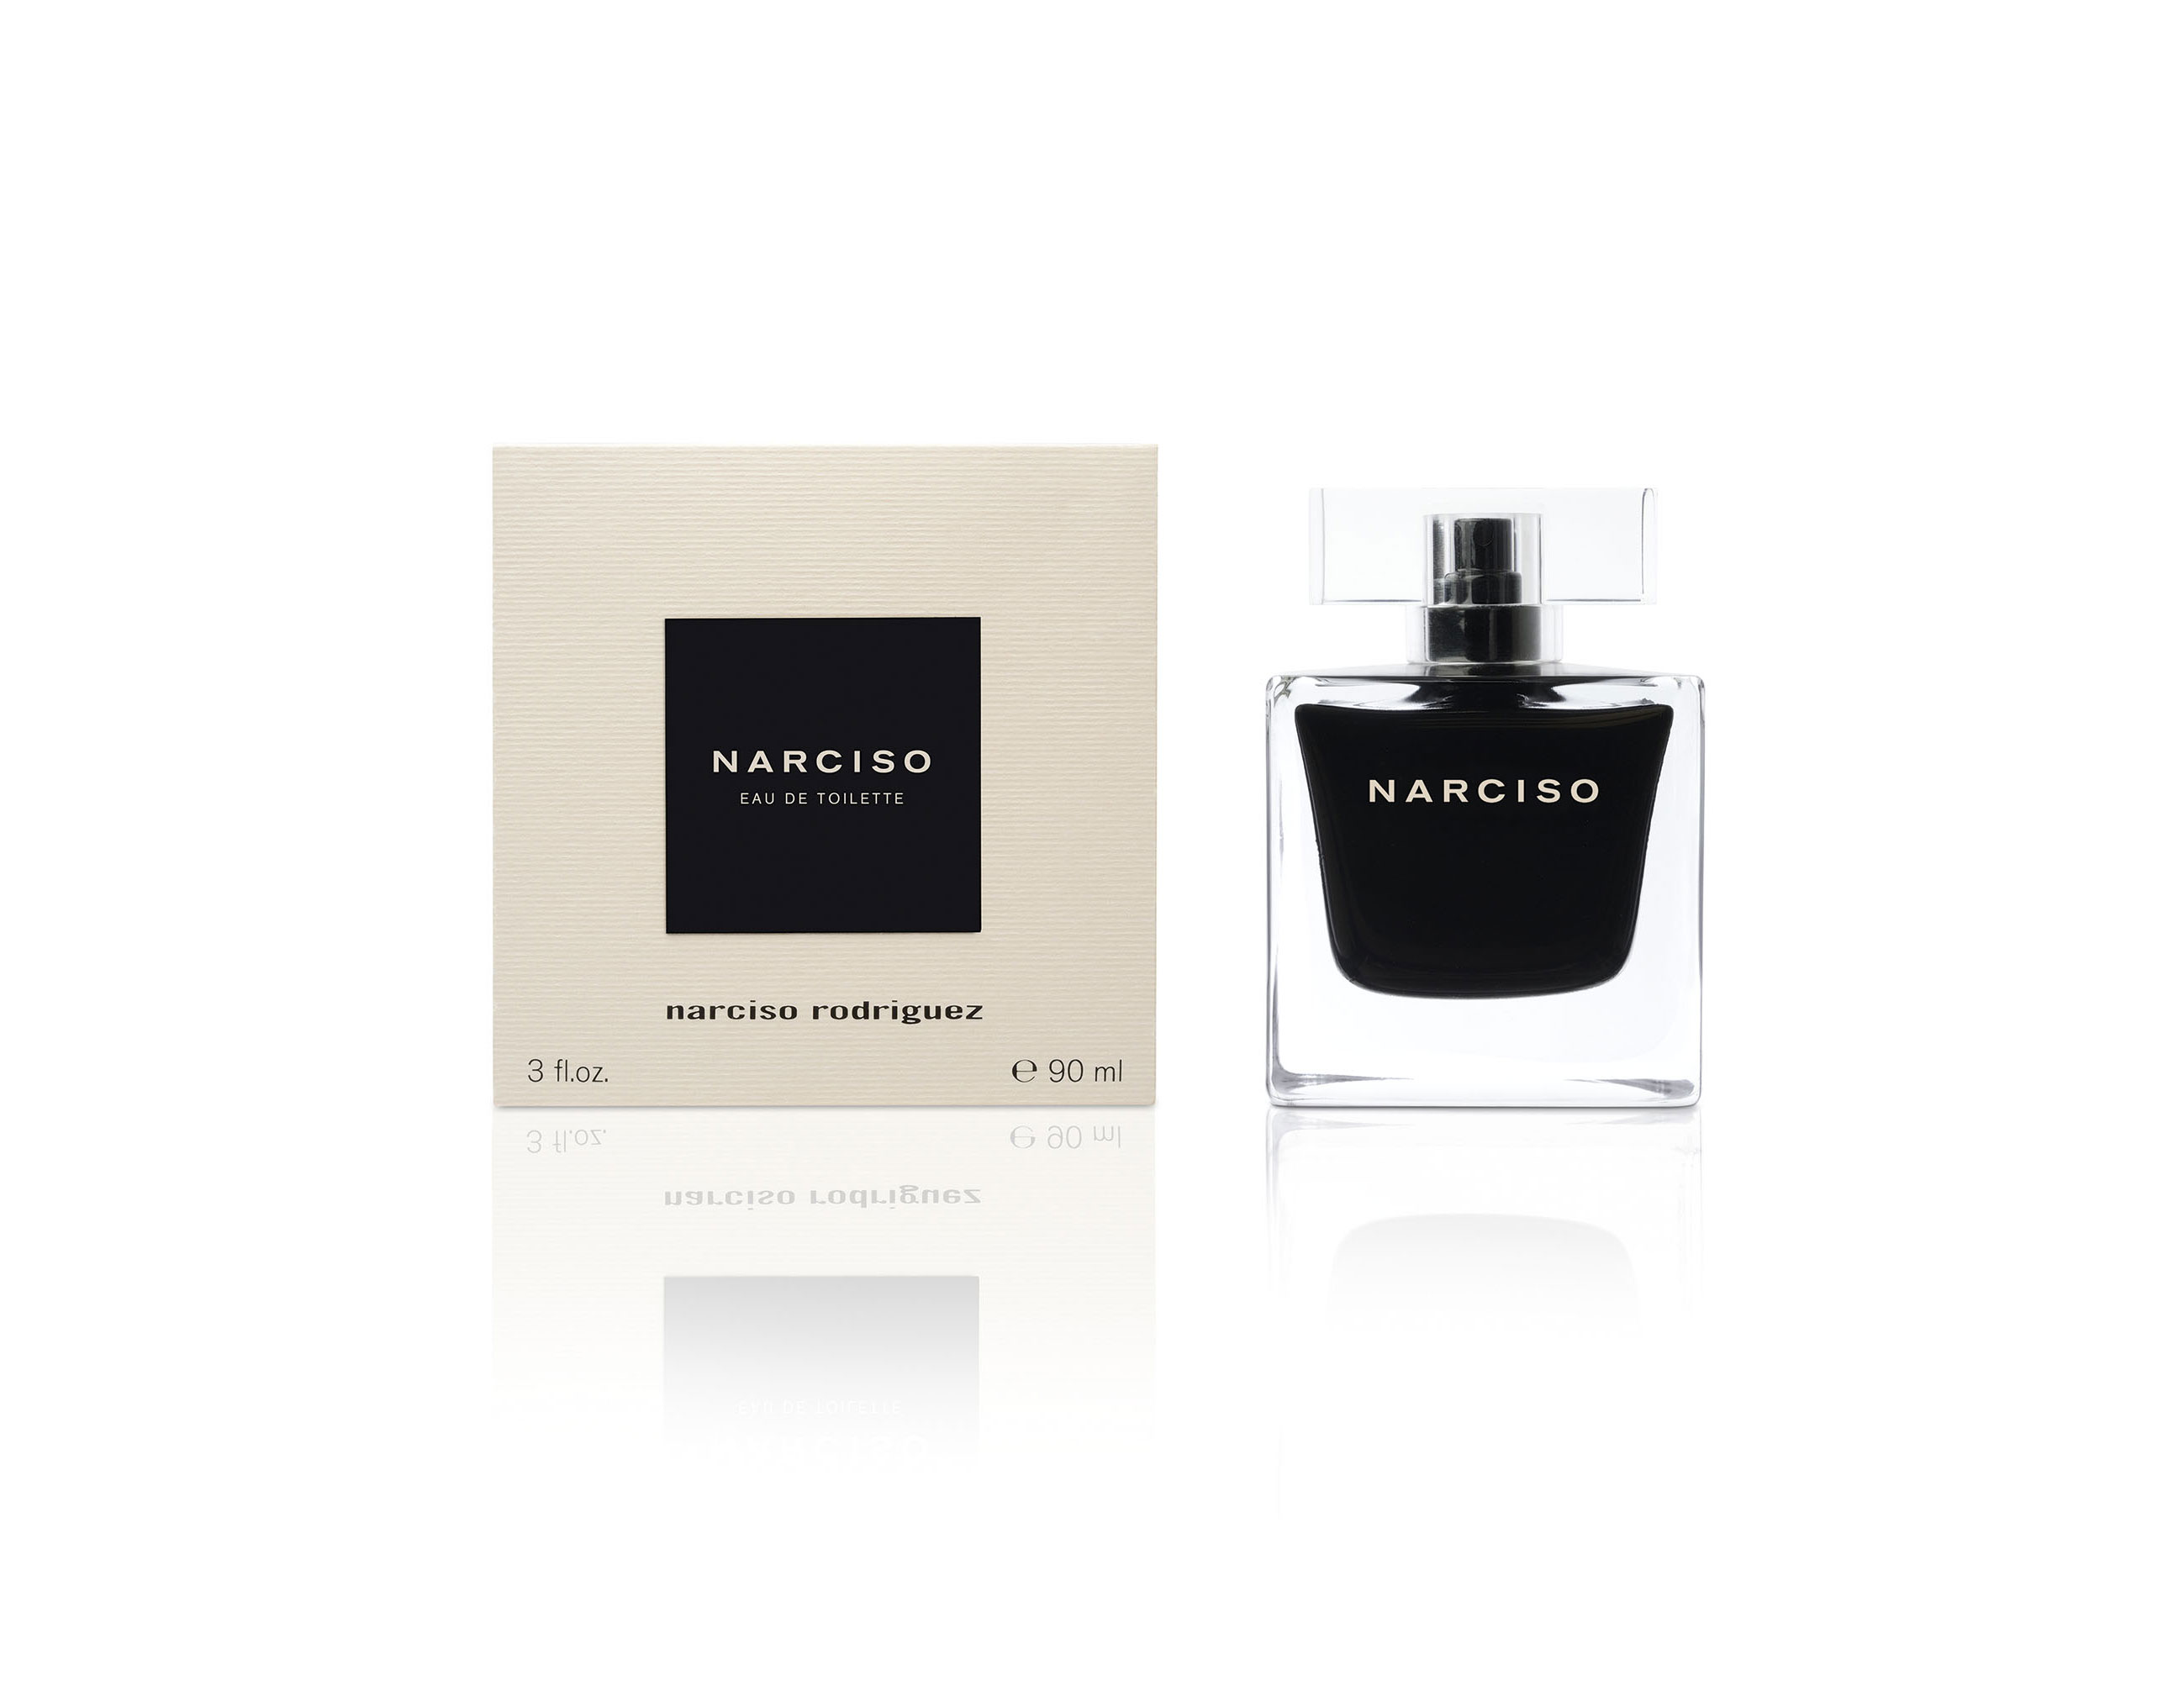 Narciso EDT, Narciso Rodriguez.